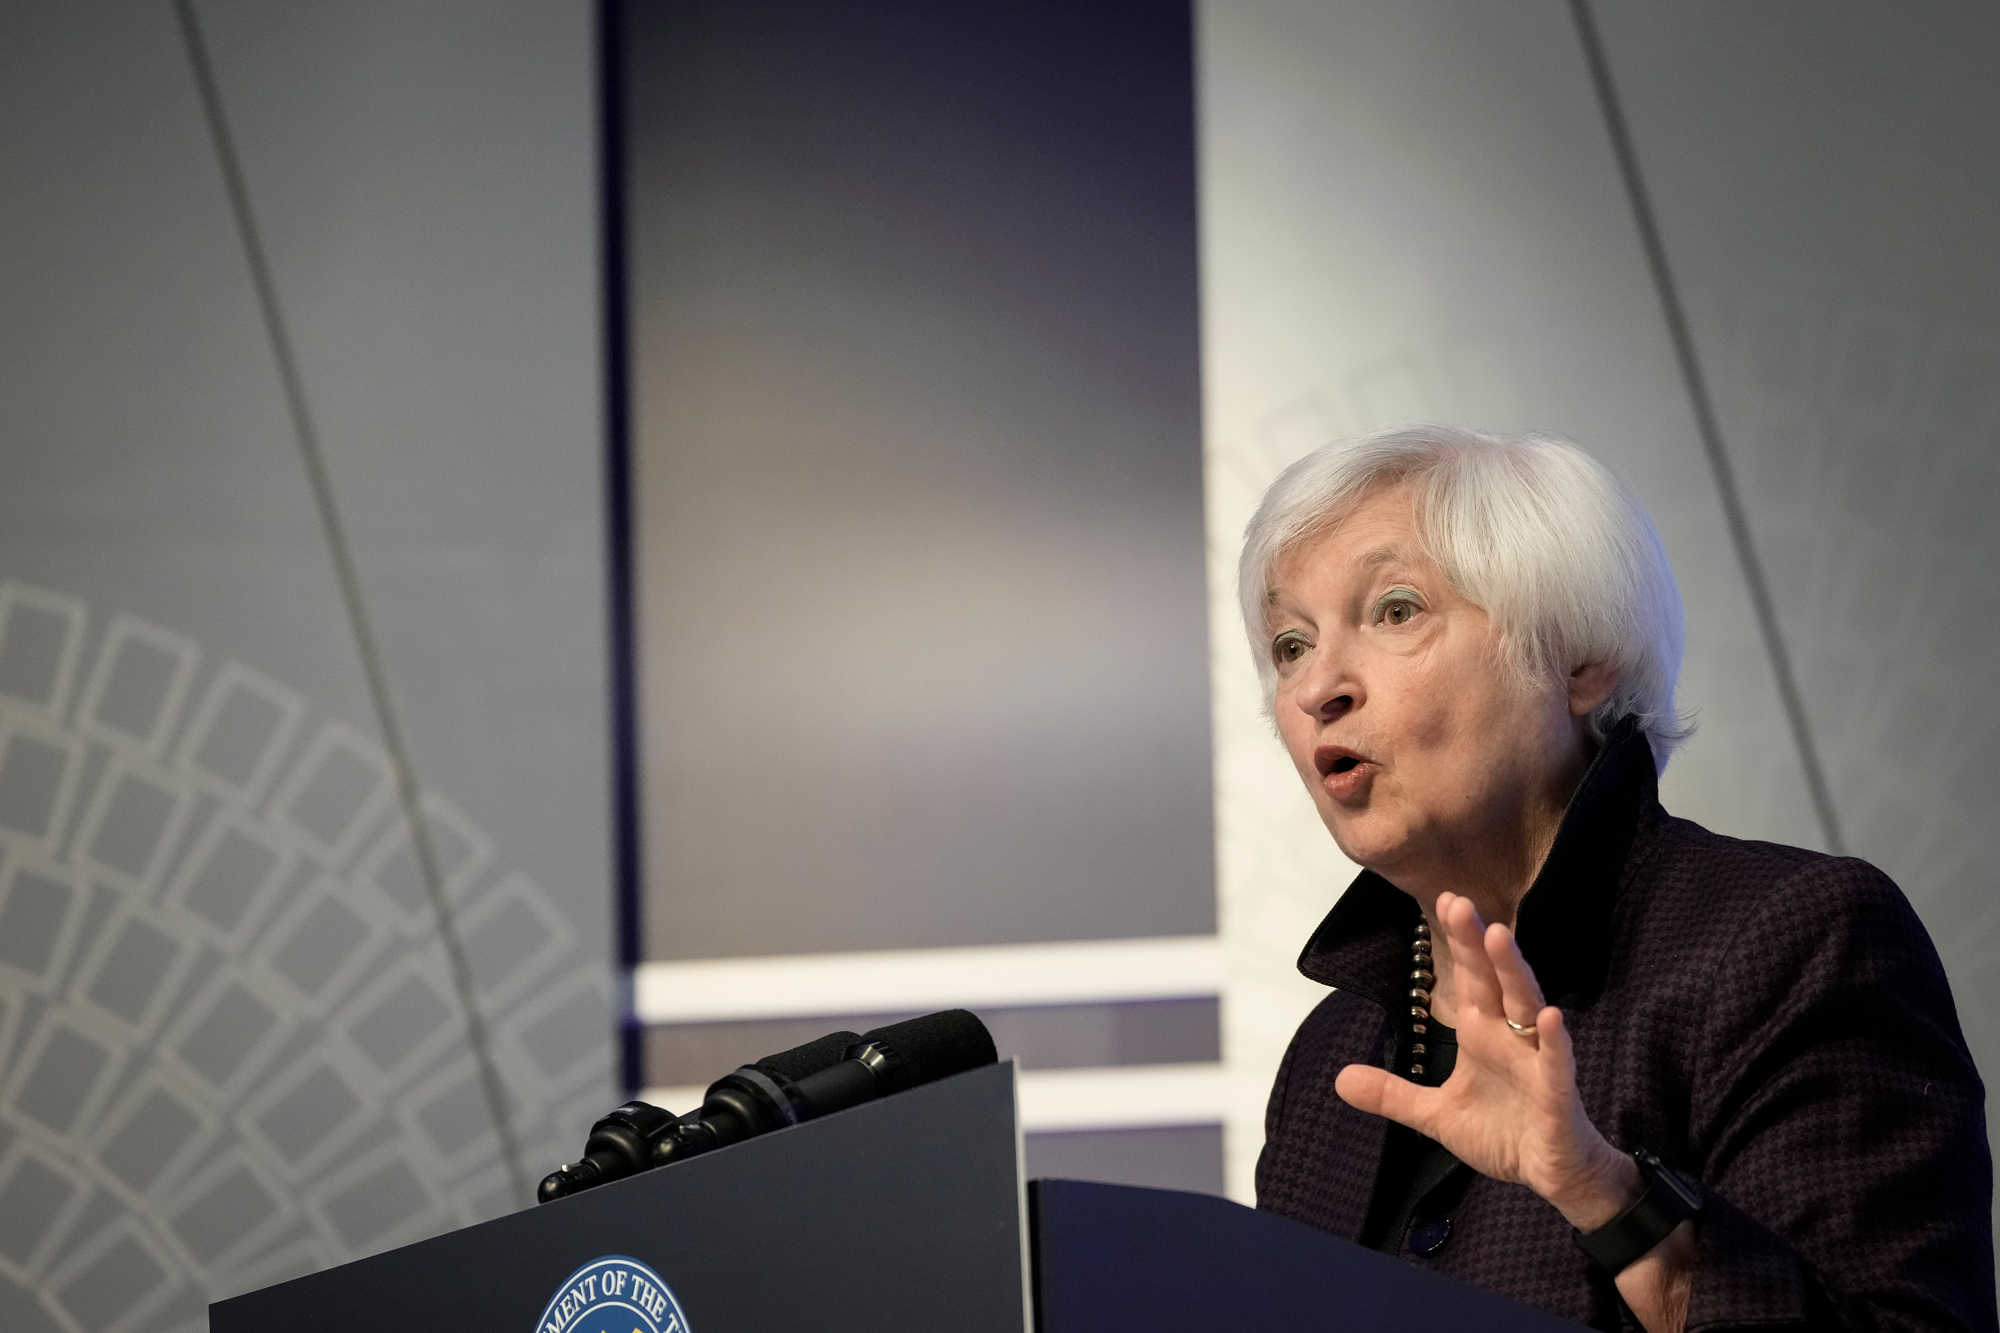 Yellen says Biden-Xi meeting intended to “stabilize” a US-China relationship